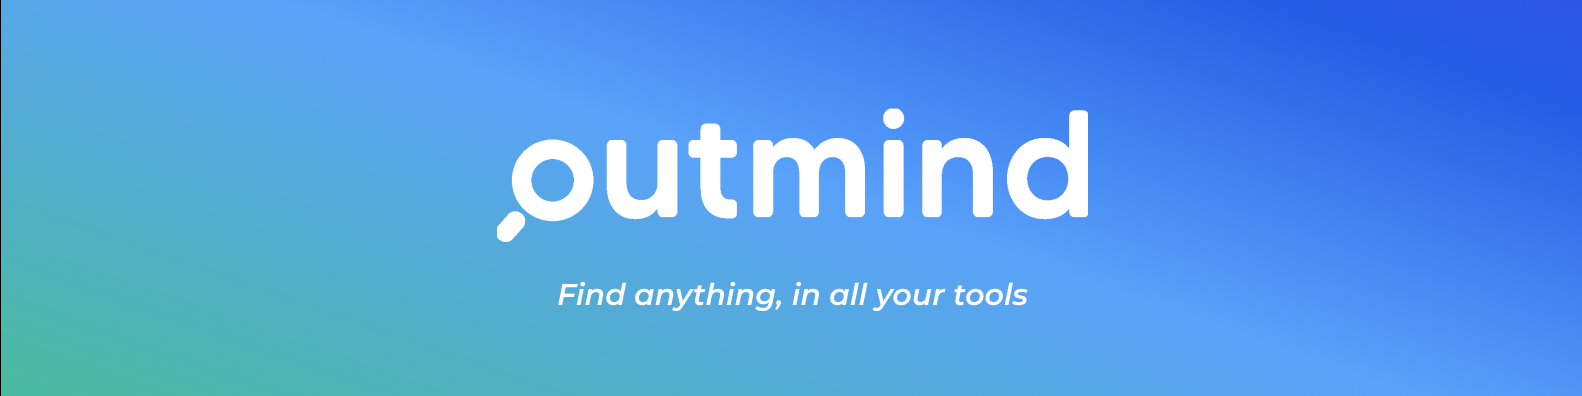 Review Outmind: Intelligent search engine connected to internal tools - Appvizer